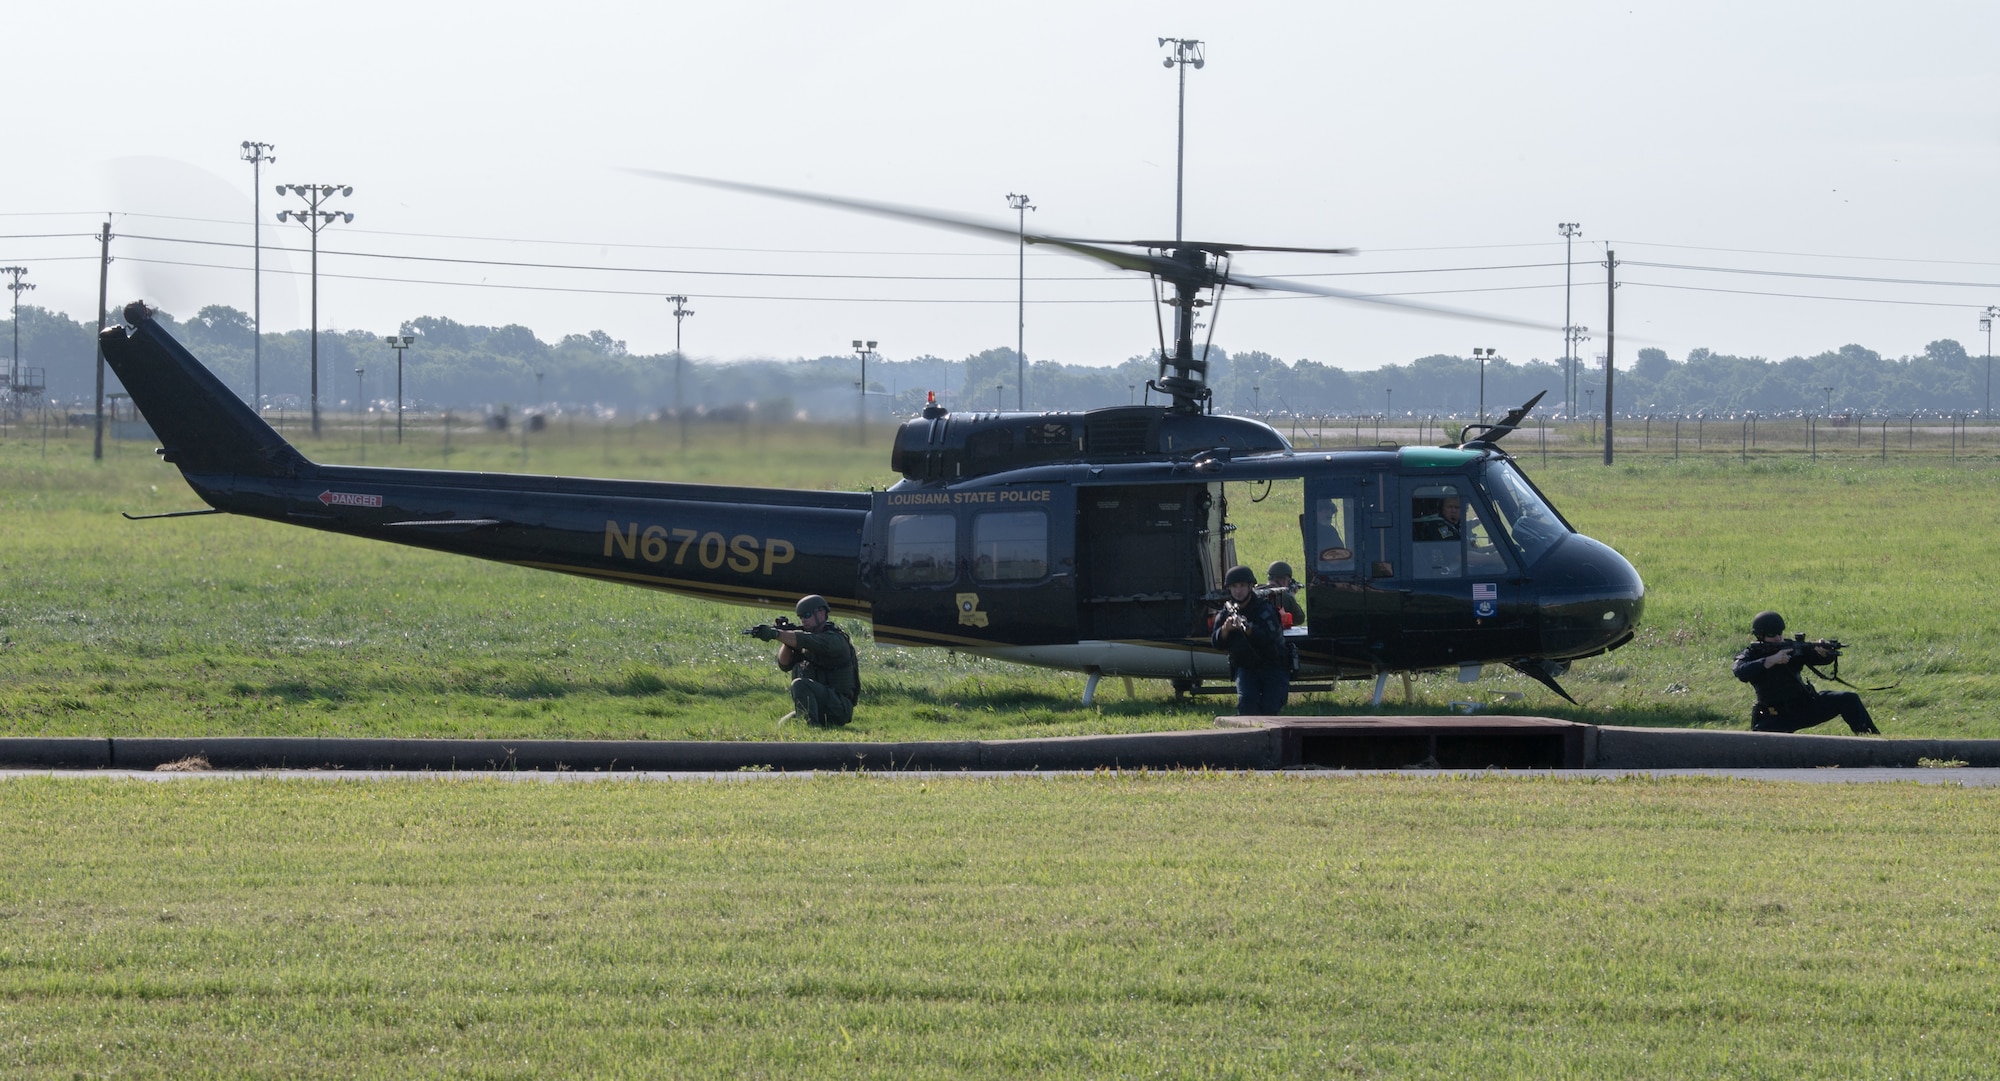 The training event integrated the Louisiana State Police, Louisiana State Police SWAT, 2nd Security Forces Squadron, and Mobile Field Force members. These are agencies that would work together during dangerous situations to help resolve them.